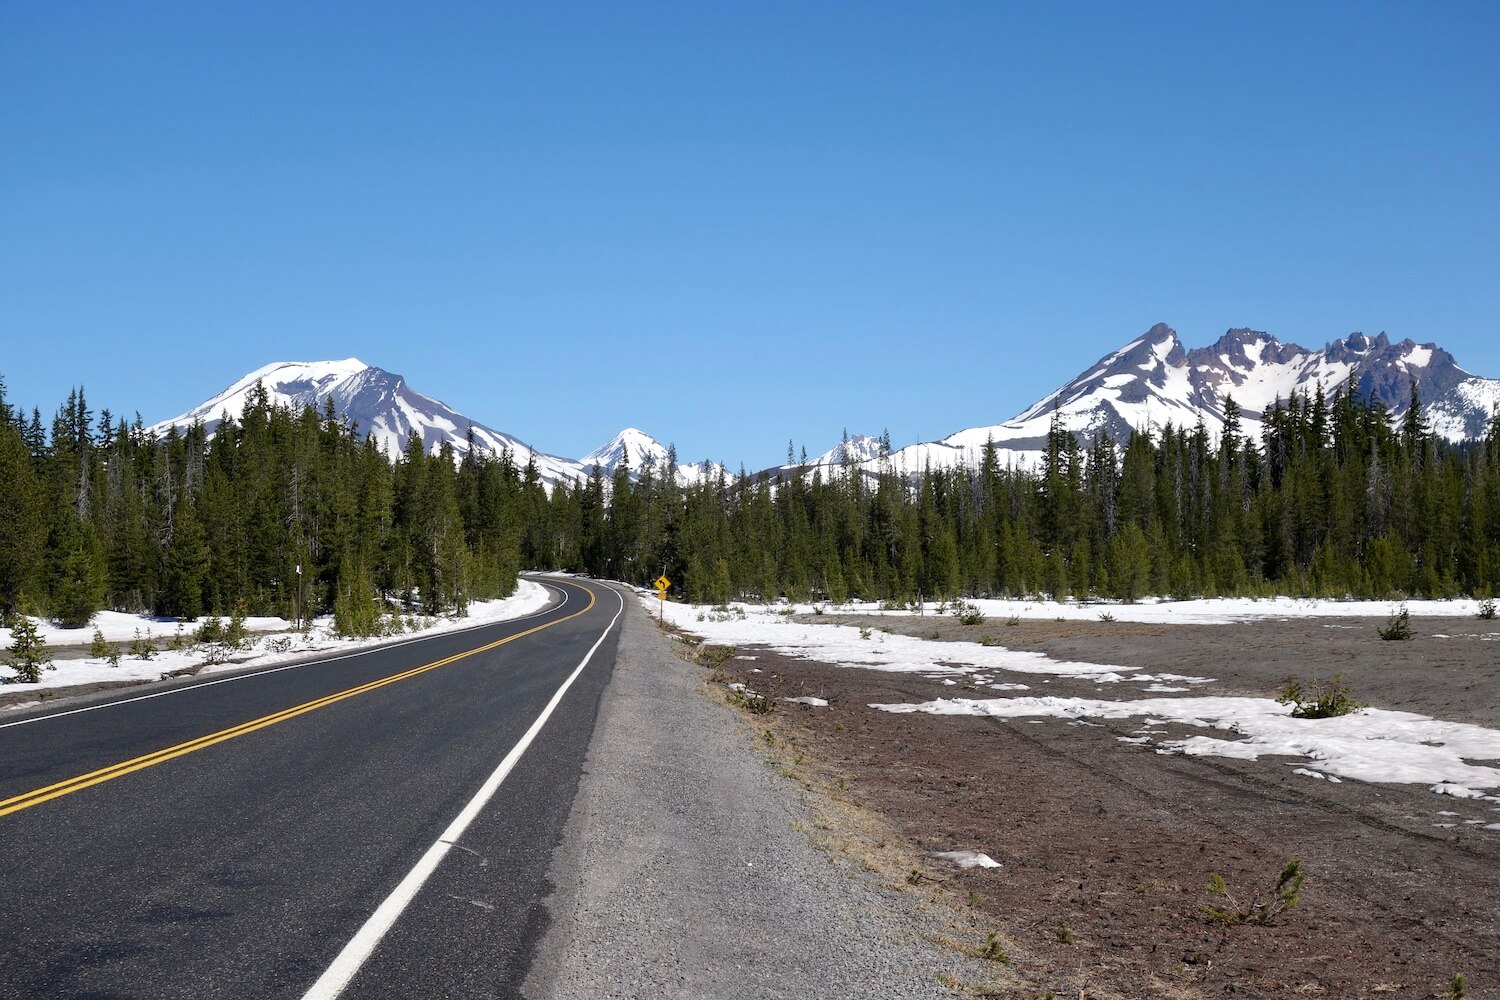 This Oregon road trip stops amongst the Cascade Mountains which are still snow covered in this photo.  There is also snow along side the road. 